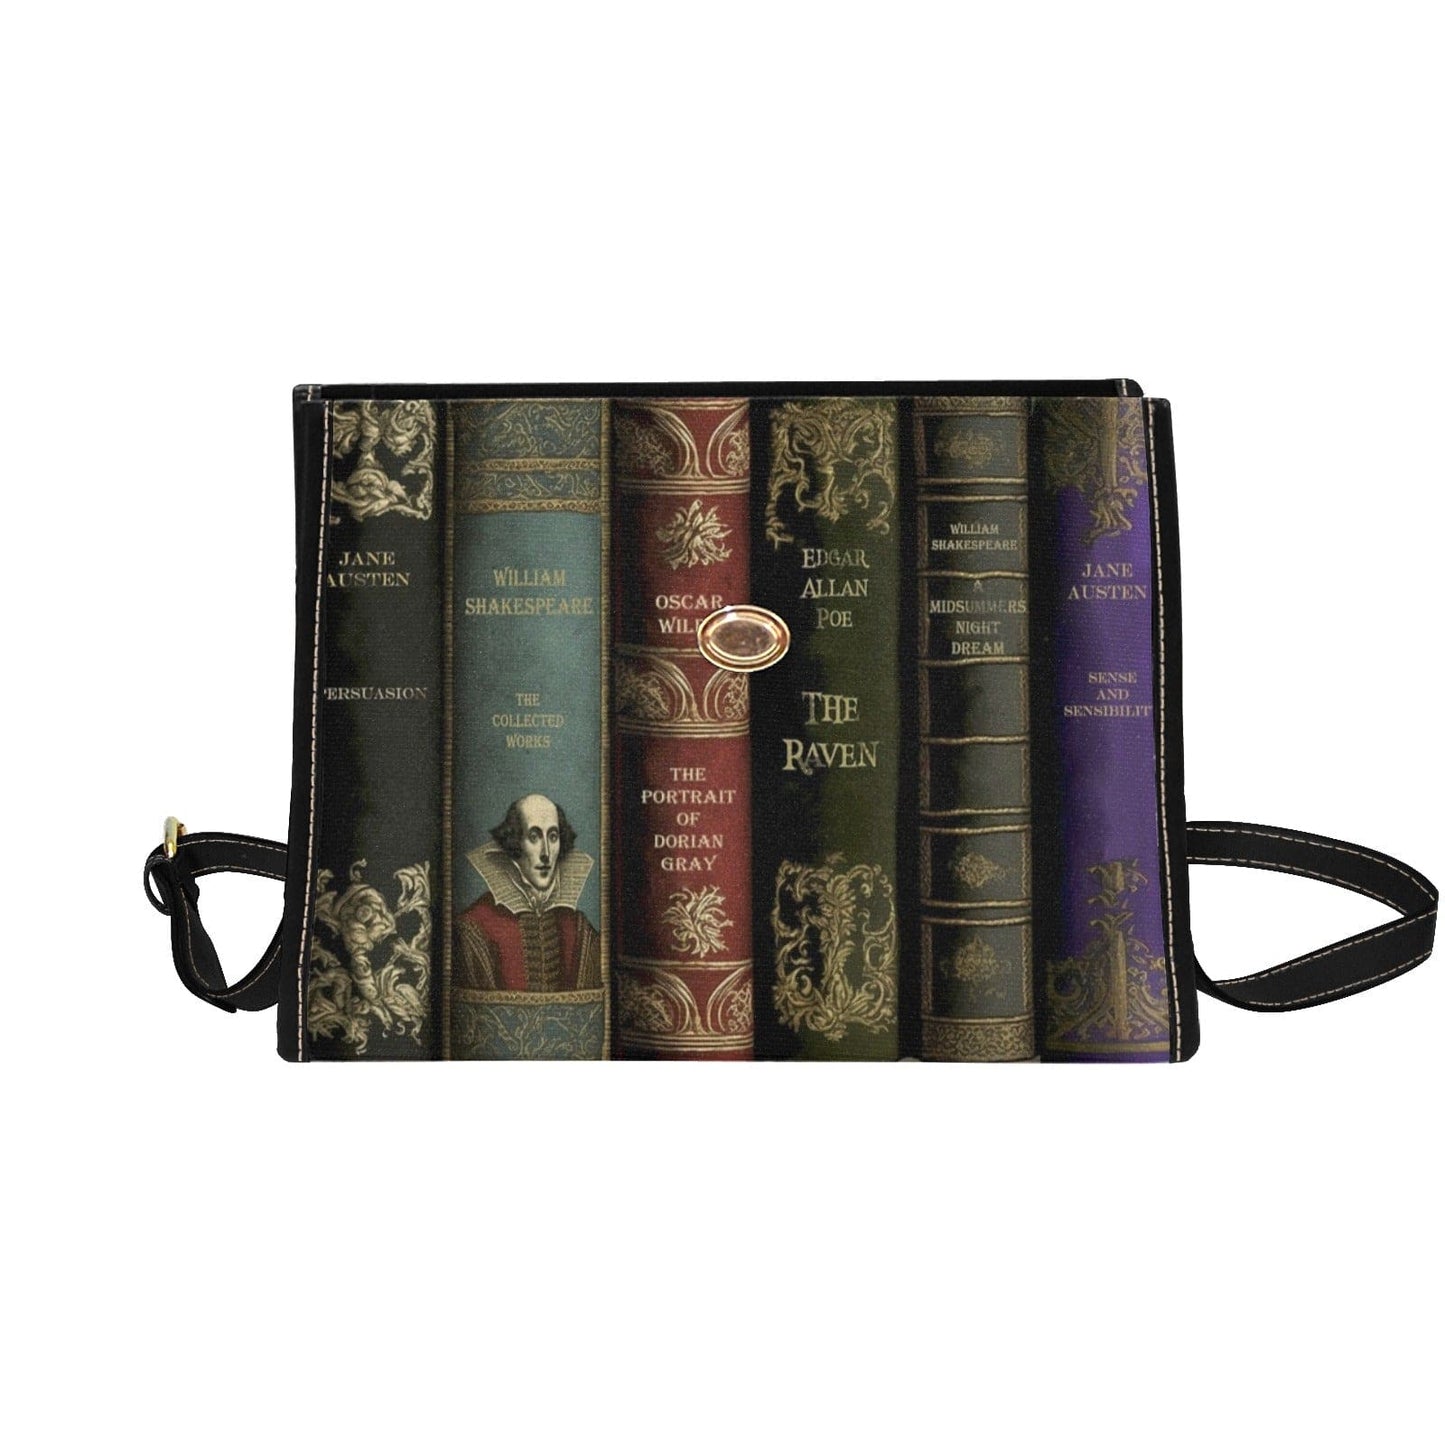 front view with front flap folded backto reveal the full artwork on the front of the satchel handbag printed with spines of classic literature titles in dark colours